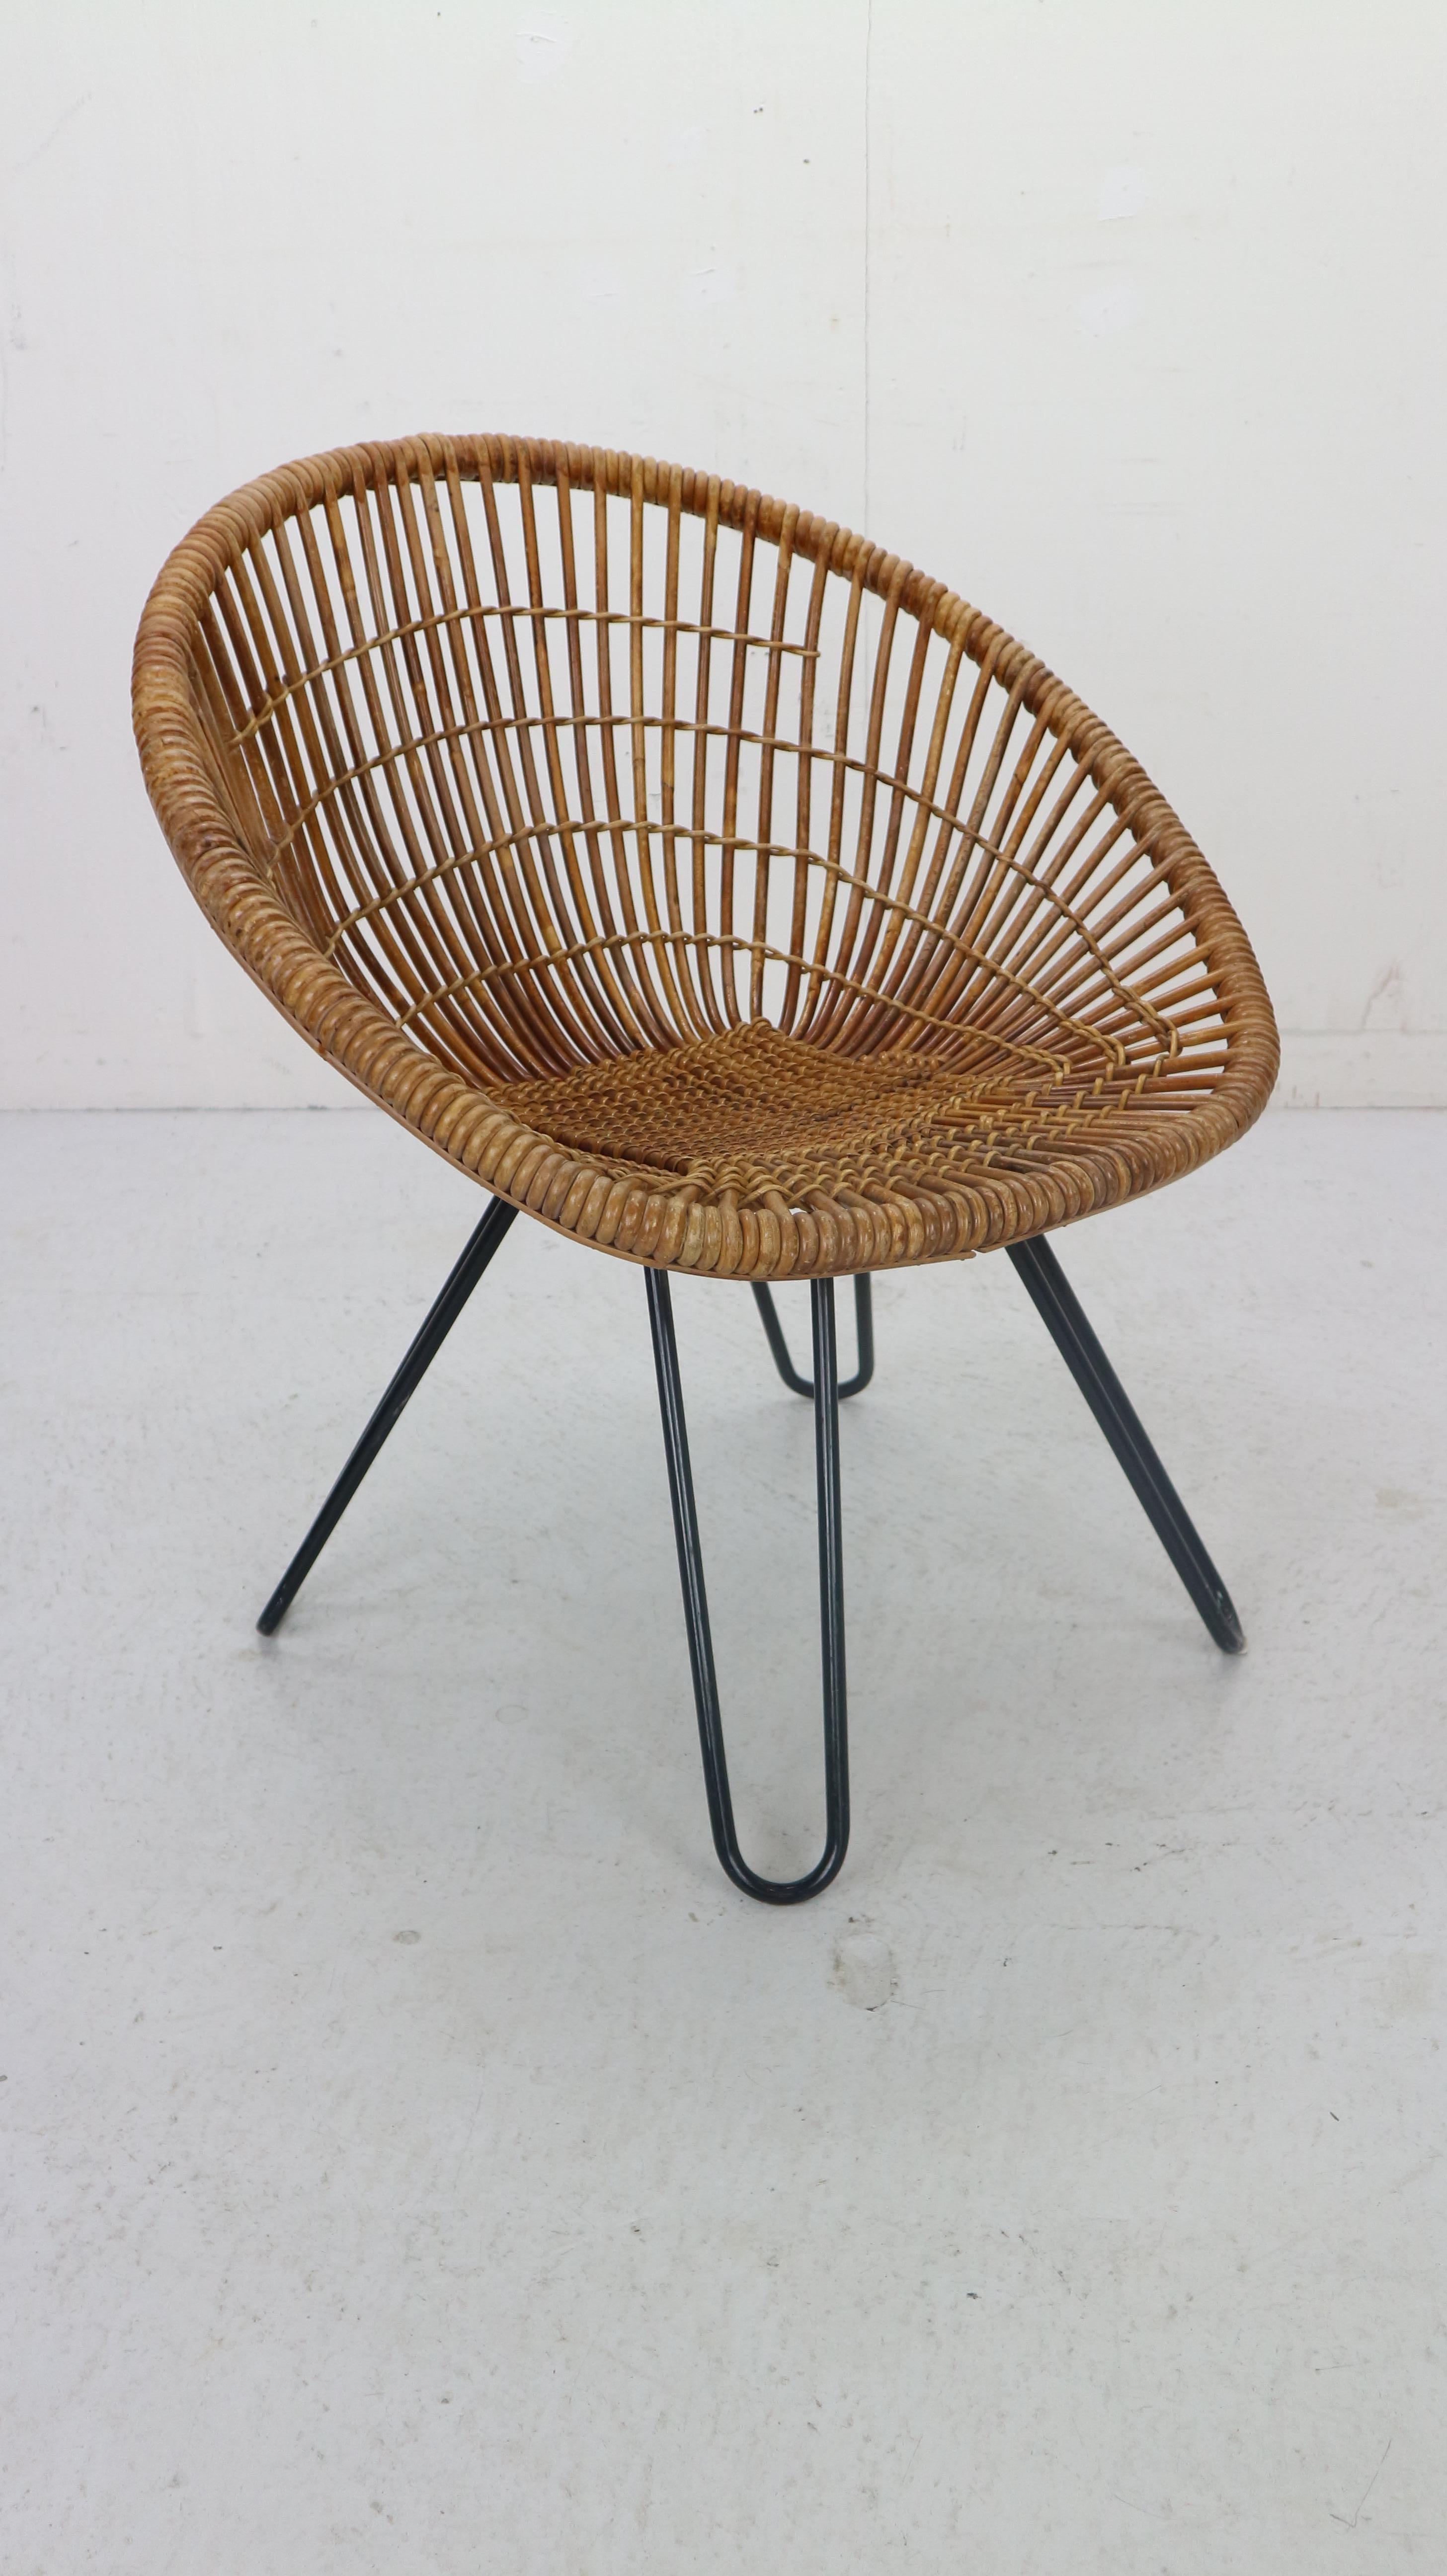 Dutch Midcentury Basket Woven Lounge Chair with Hairpin Metal Legs, 1950s